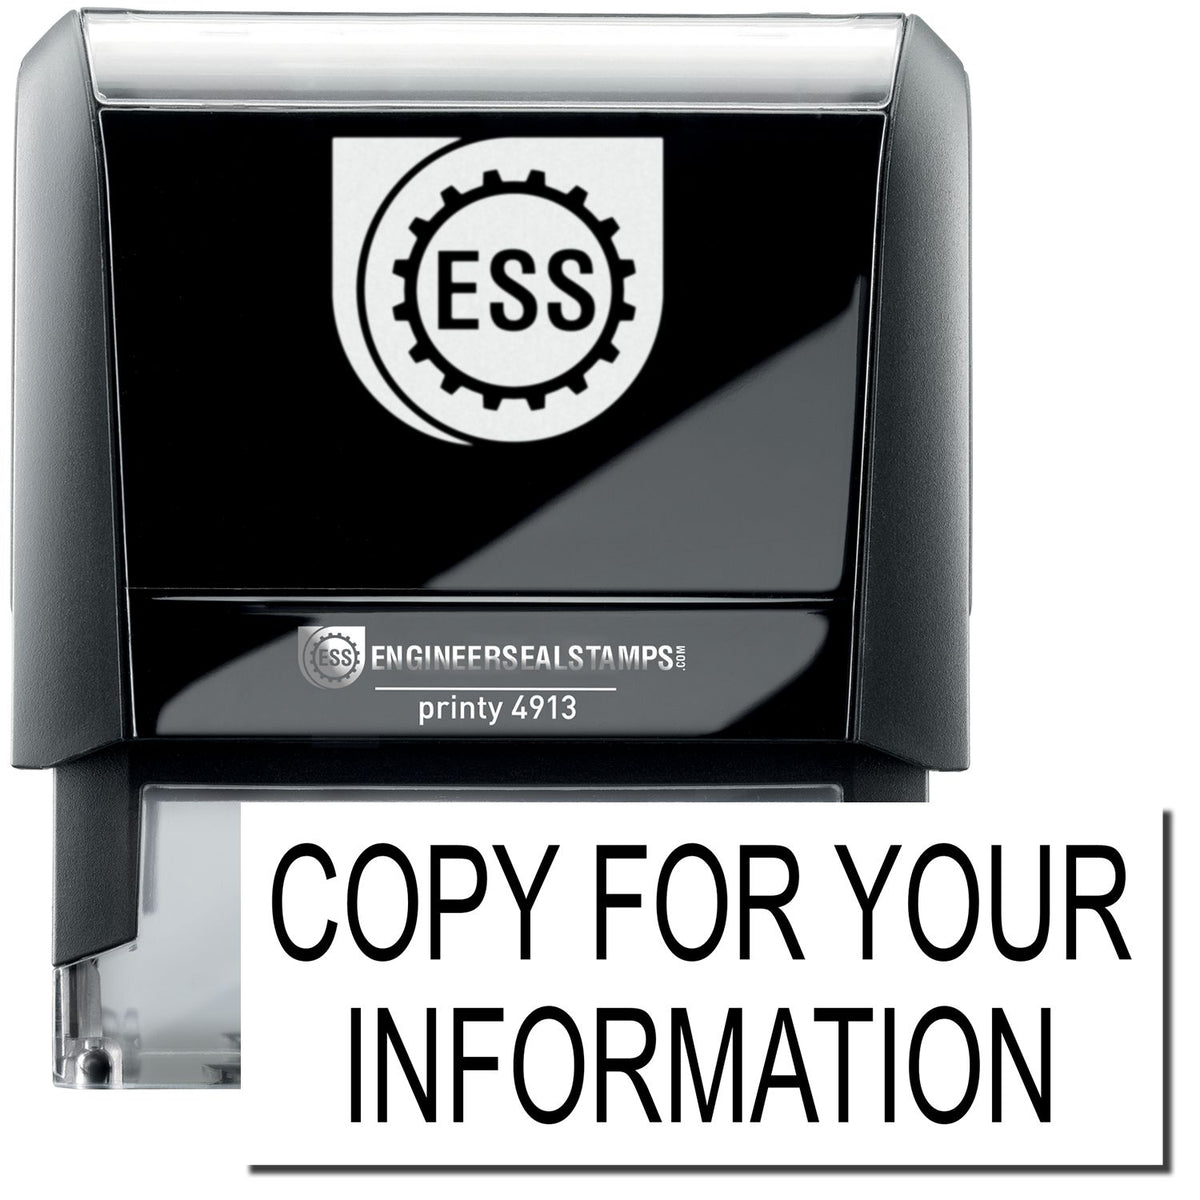 A large self-inking stamp with a stamped image showing the text &quot;COPY FOR YOUR INFORMATION&quot; in a large bold font.